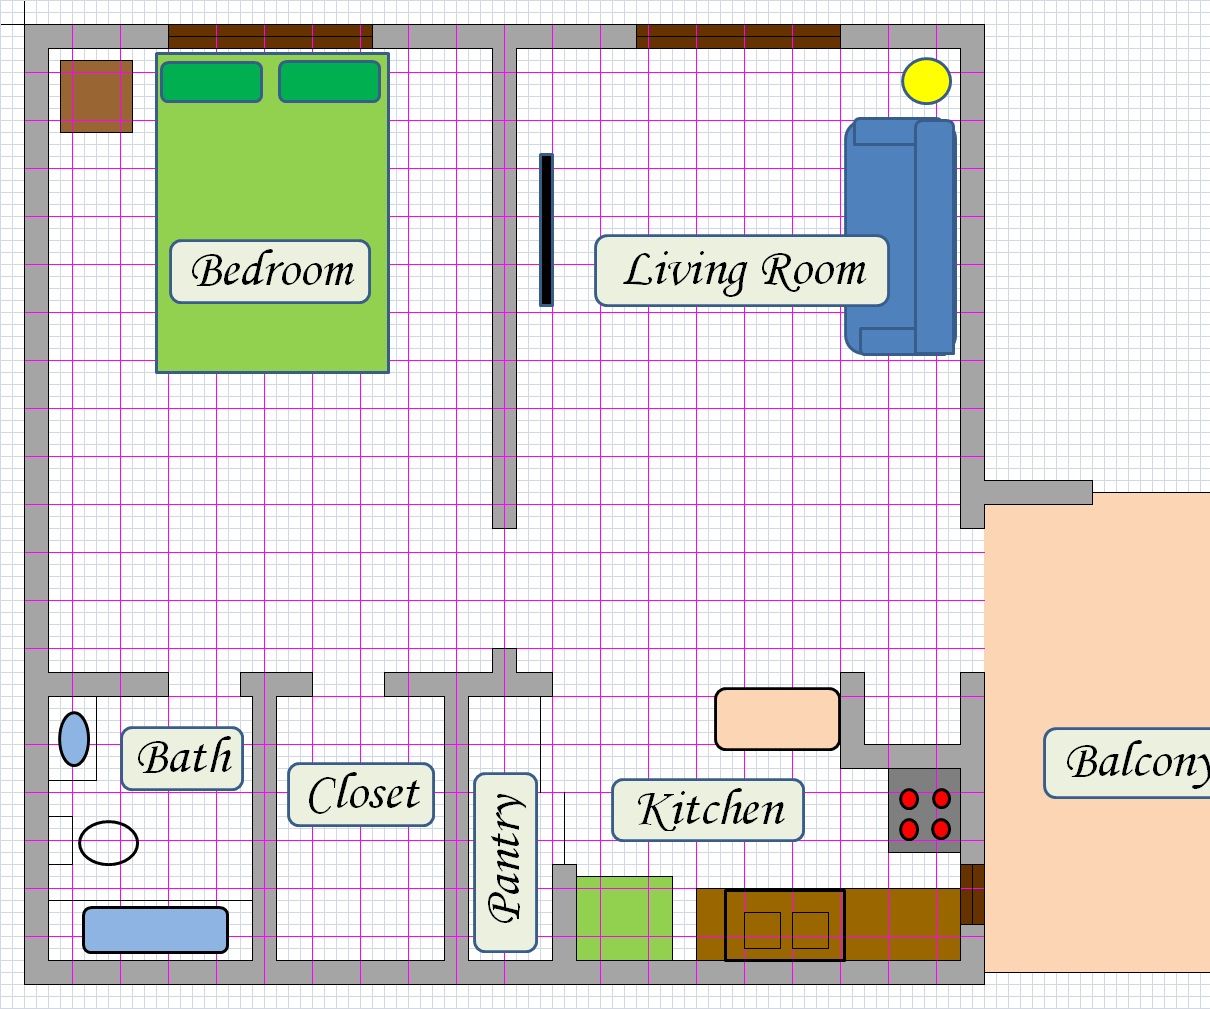 Create Floor Plan Using MS Excel 5 Steps (with Pictures)